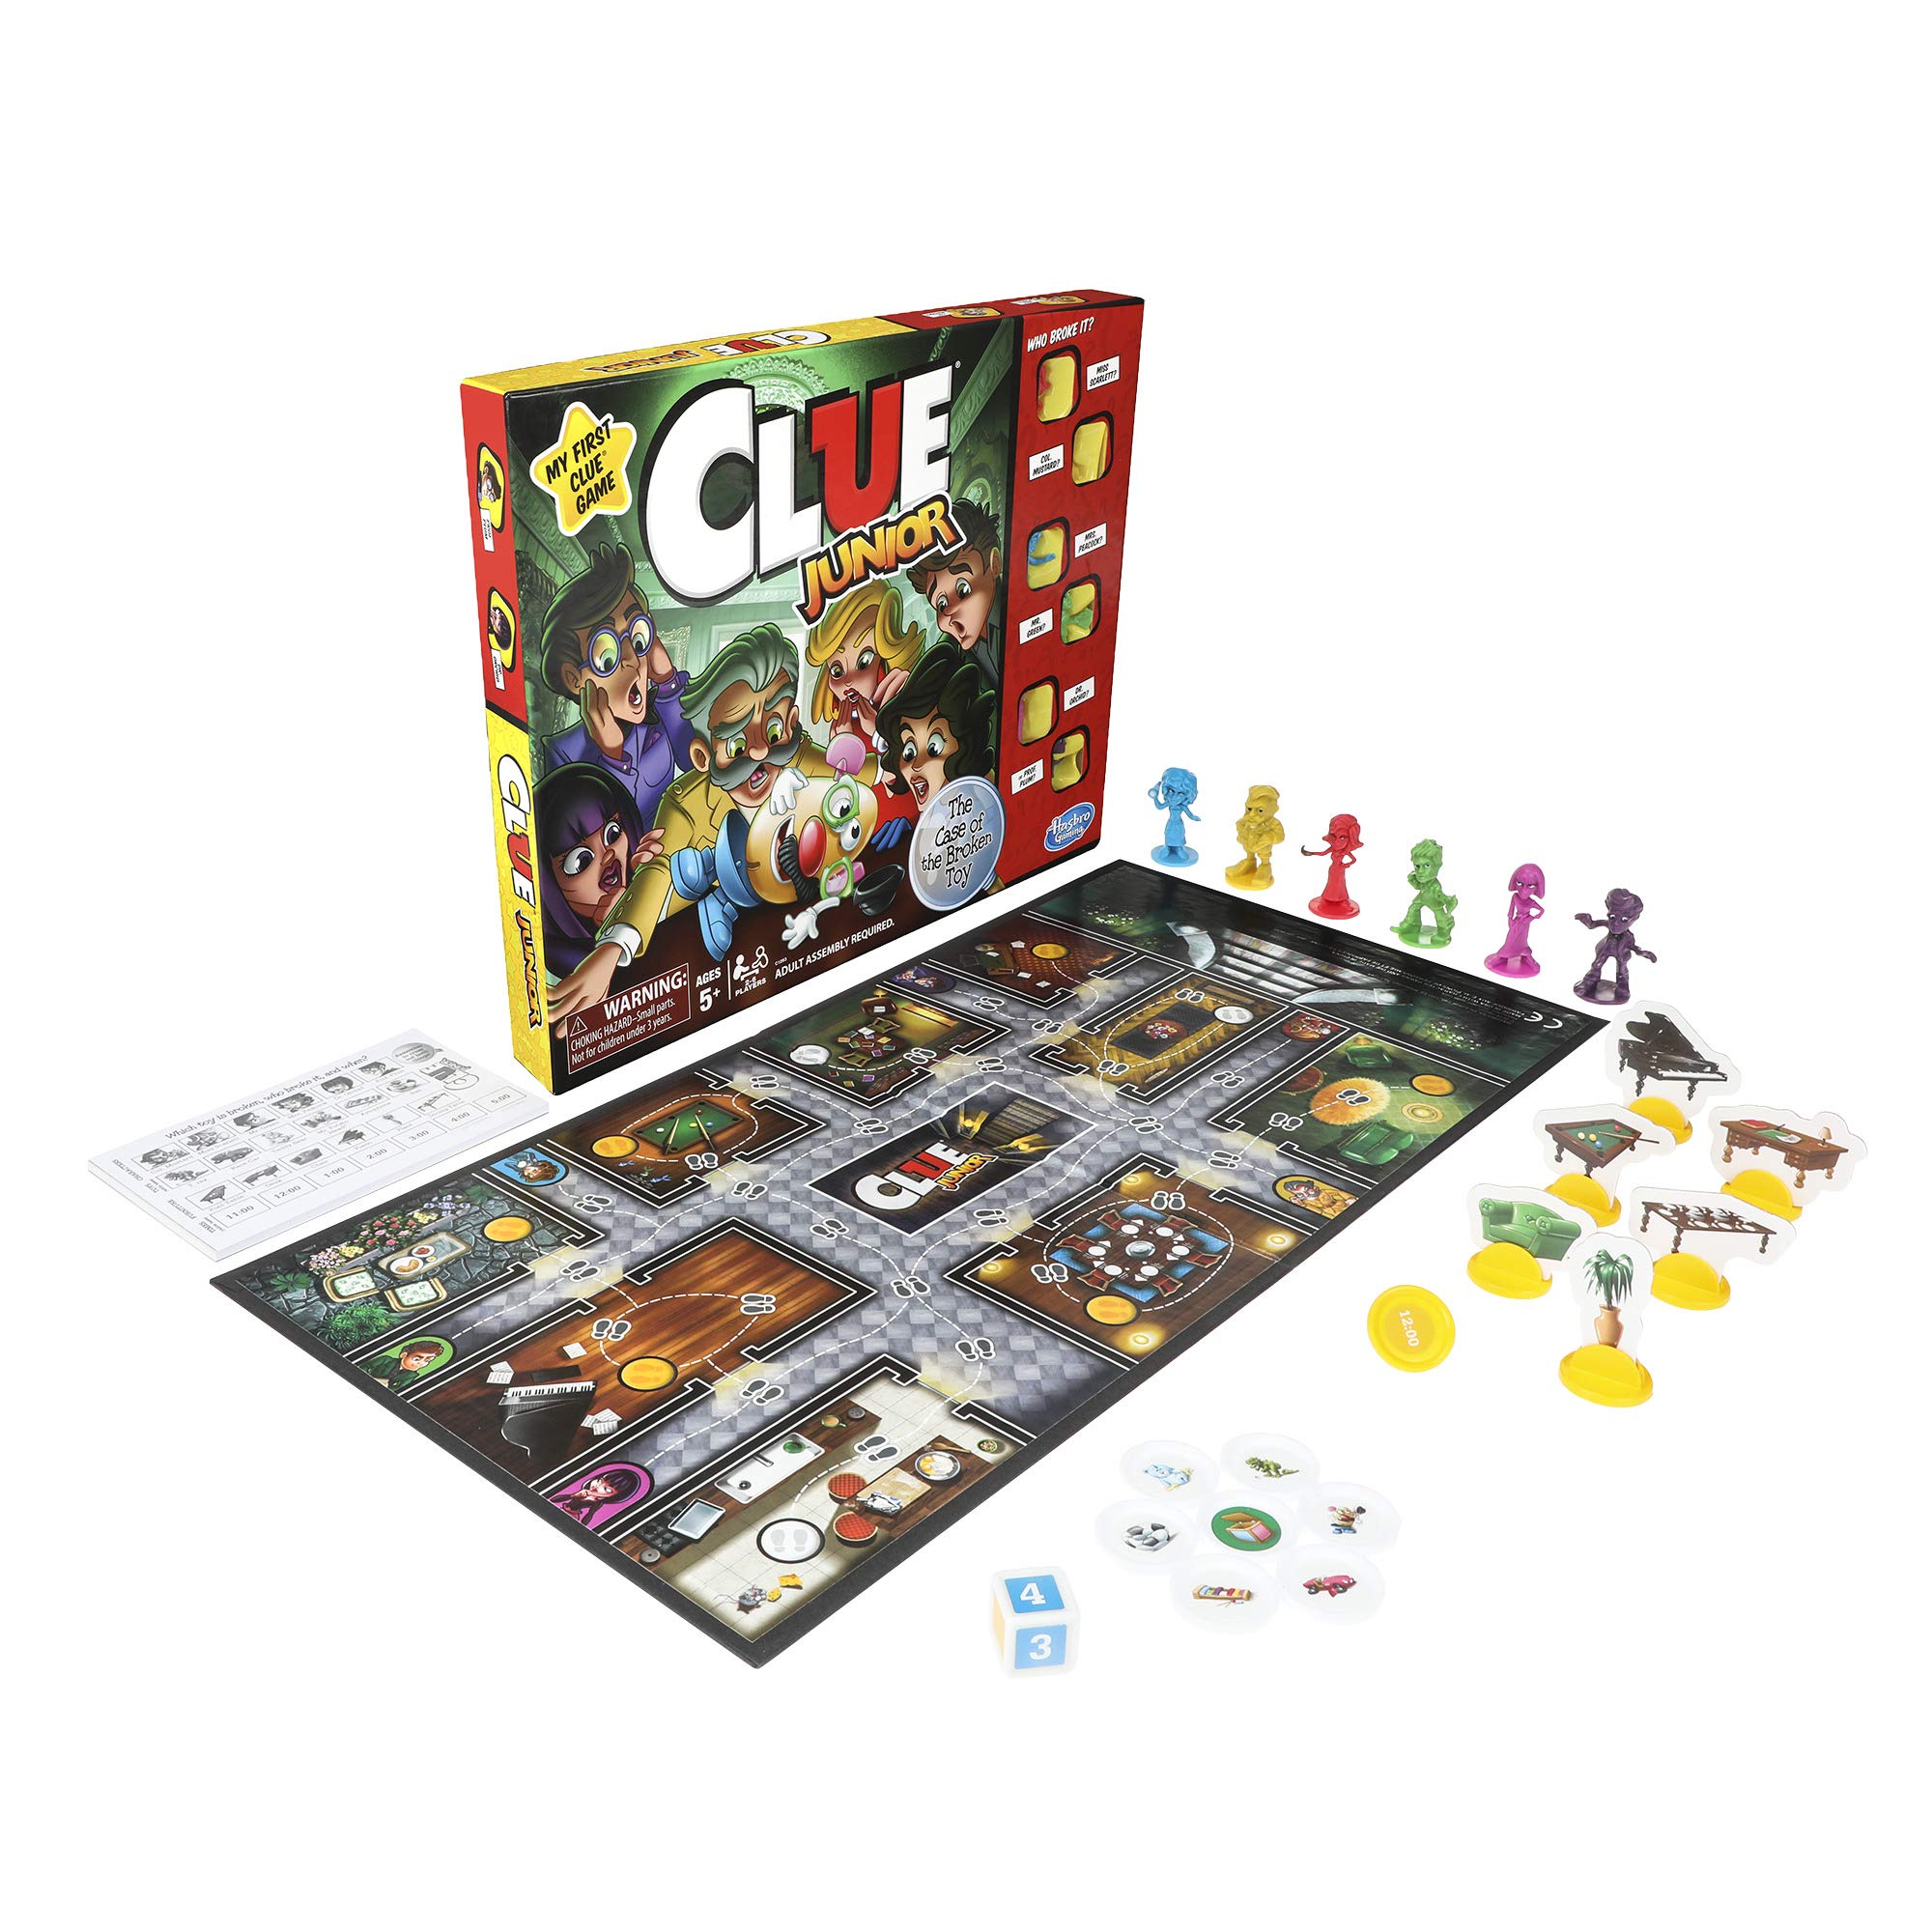 Hasbro Gaming Clue Junior Board Game for Kids Ages 5 and Up, Case of The Broken Toy, Classic Mystery Game for 2-6 Players